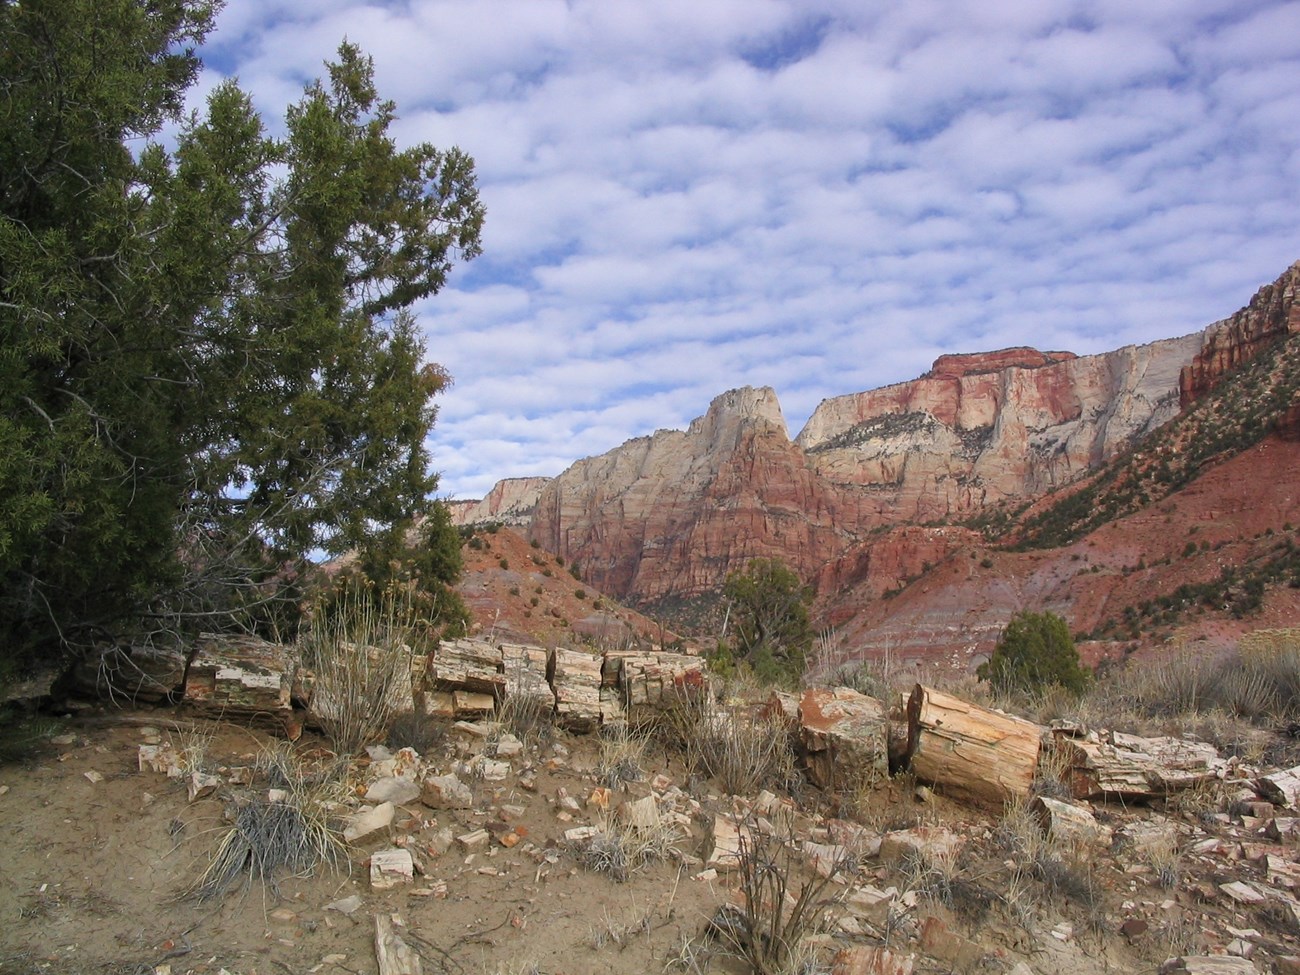 Photo of a desert landscape with fossil logs in the foreground and cliffs in the distance.